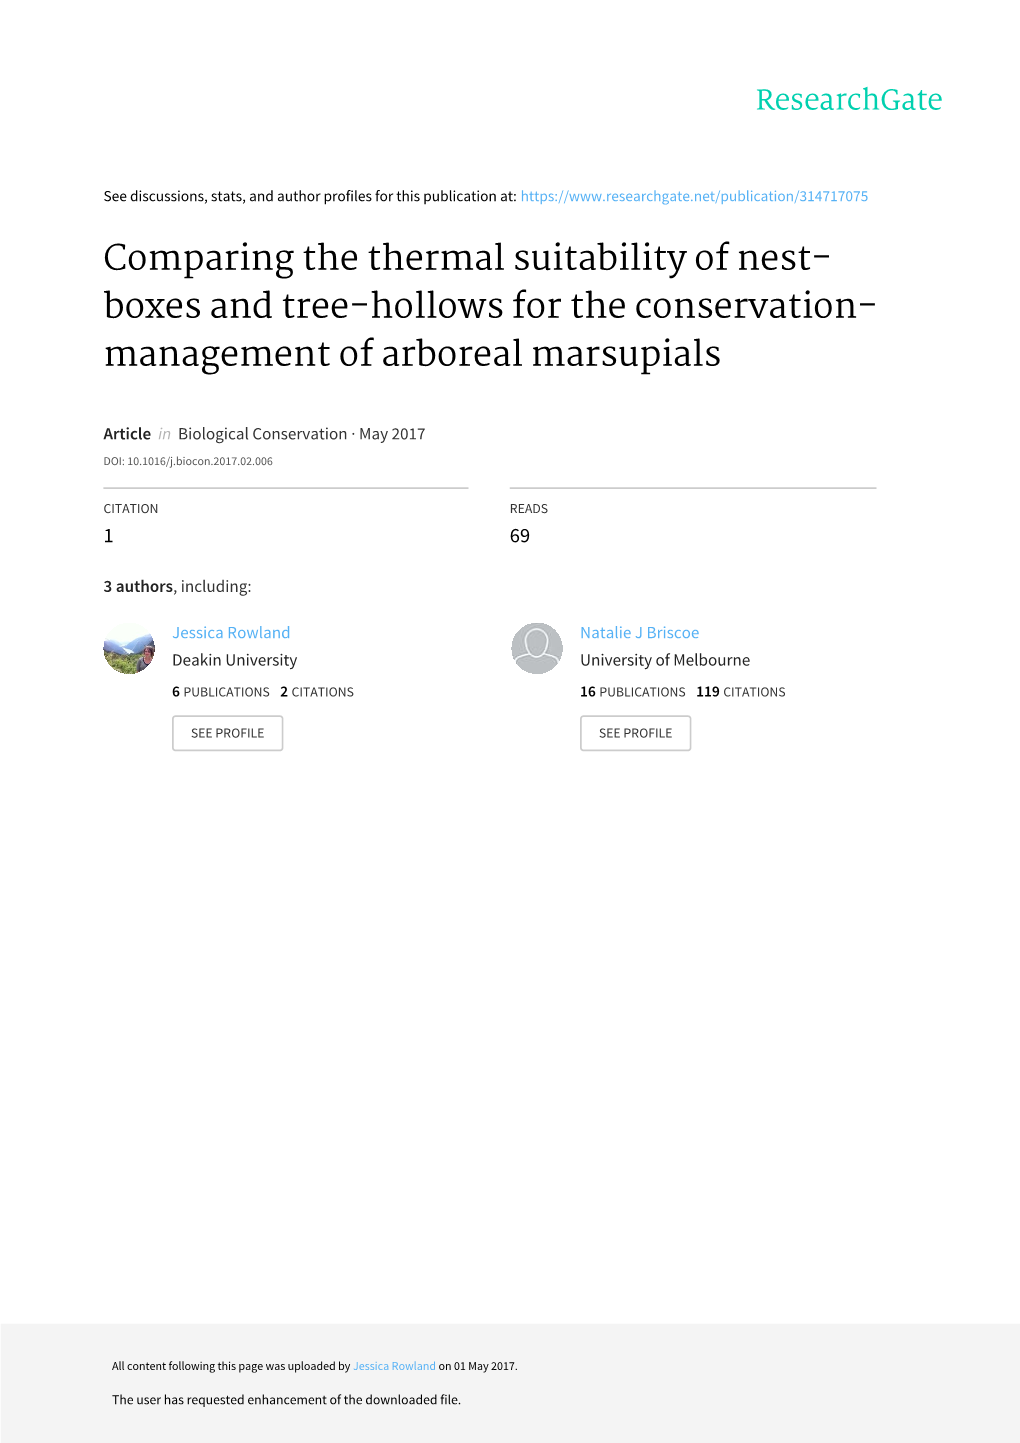 Comparing the Thermal Suitability of Nest- Boxes and Tree-Hollows for the Conservation- Management of Arboreal Marsupials